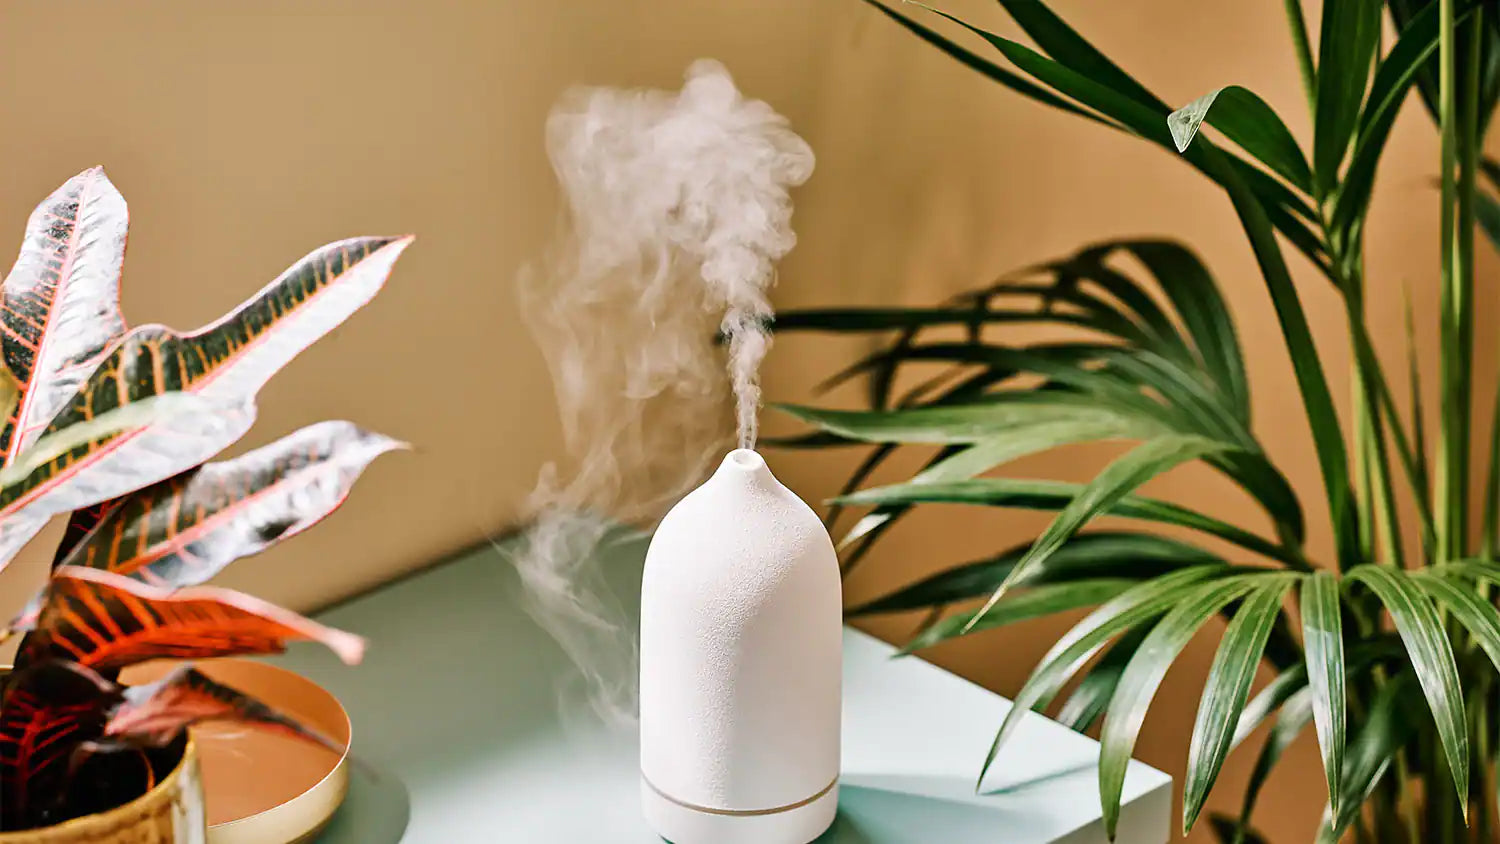 5 Essential Oils to Ward Off Bugs and Pests: The Ultimate Guide